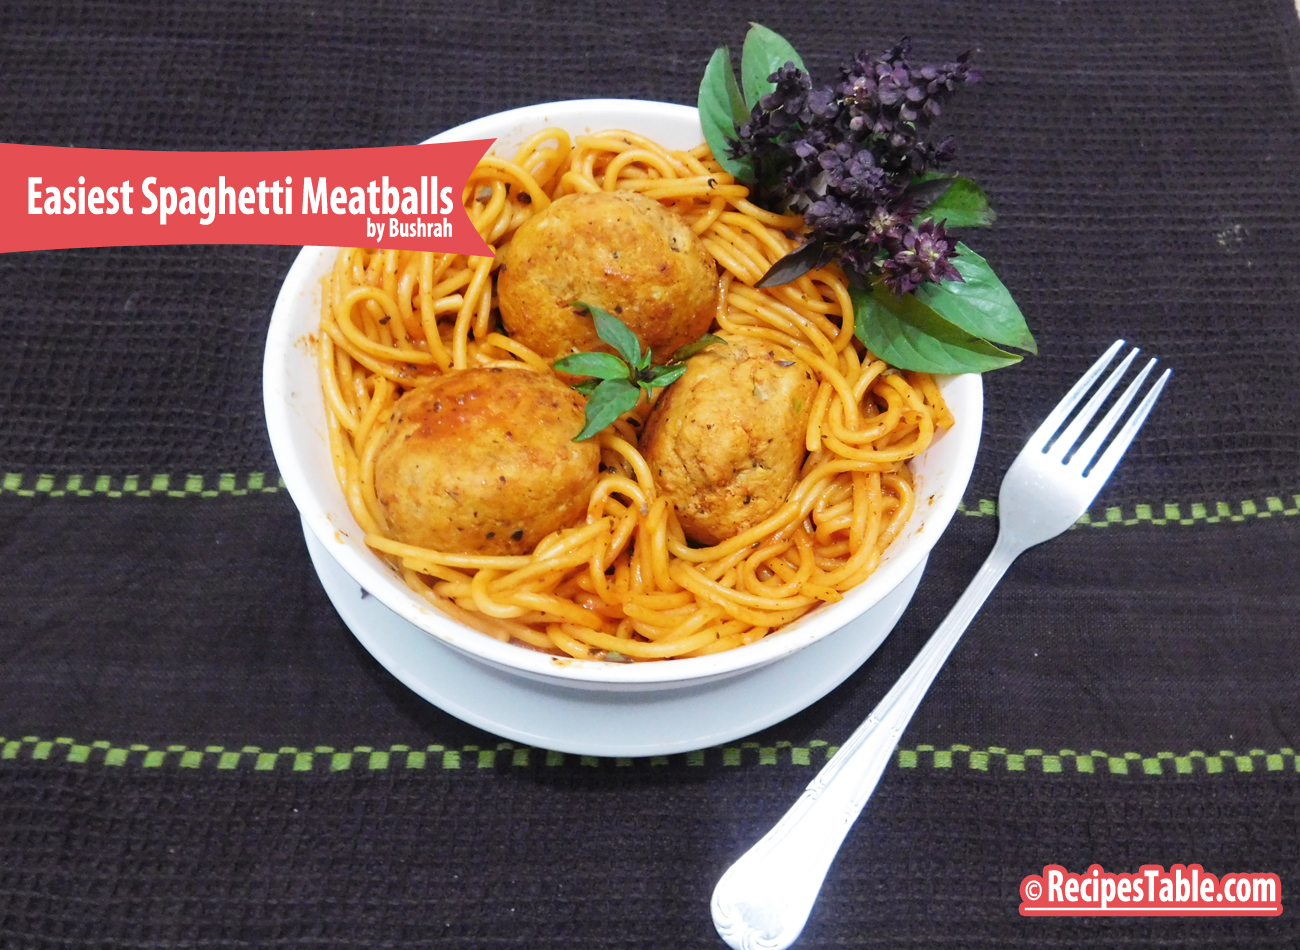 The Best and Easiest Spaghetti Meatballs